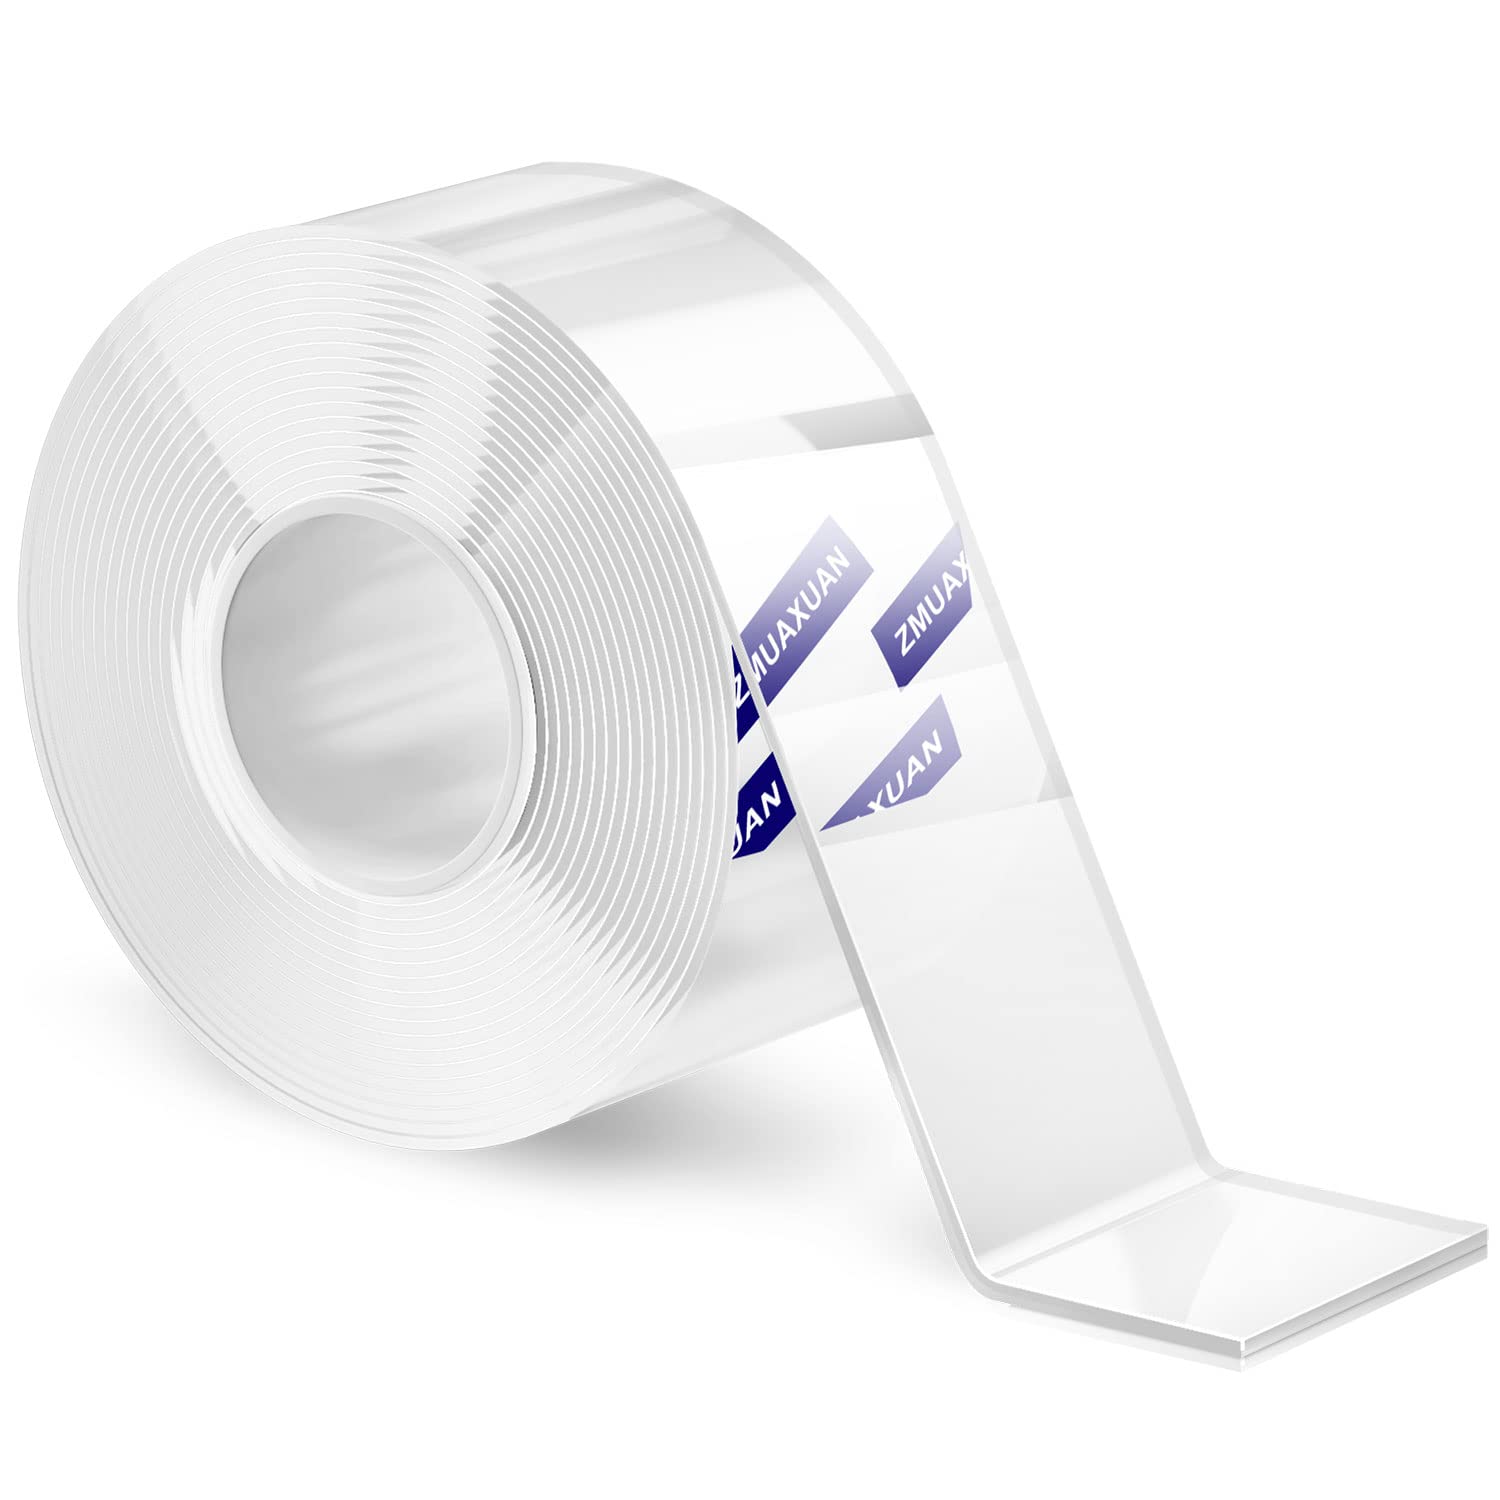 3M Double Sided Tape Heavy Duty, Multipurpose Removable Clear & Tough  Mounting Tape Sticky Adhesive, Reusable Strong Wall Tape Picture Hanging  Strips Poster Carpet Tape price in Saudi Arabia